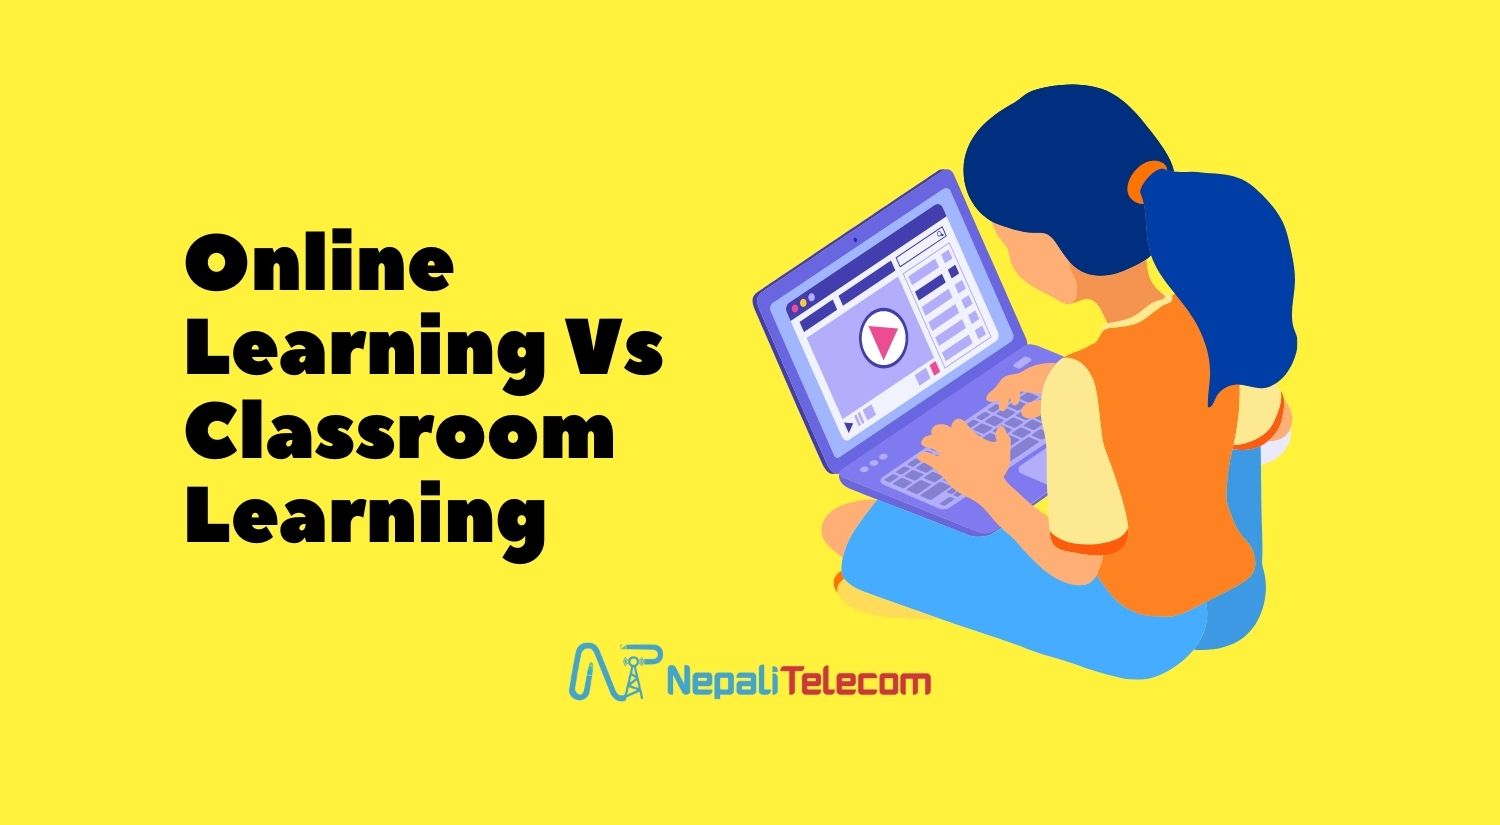 Online learning vs Classroom learning